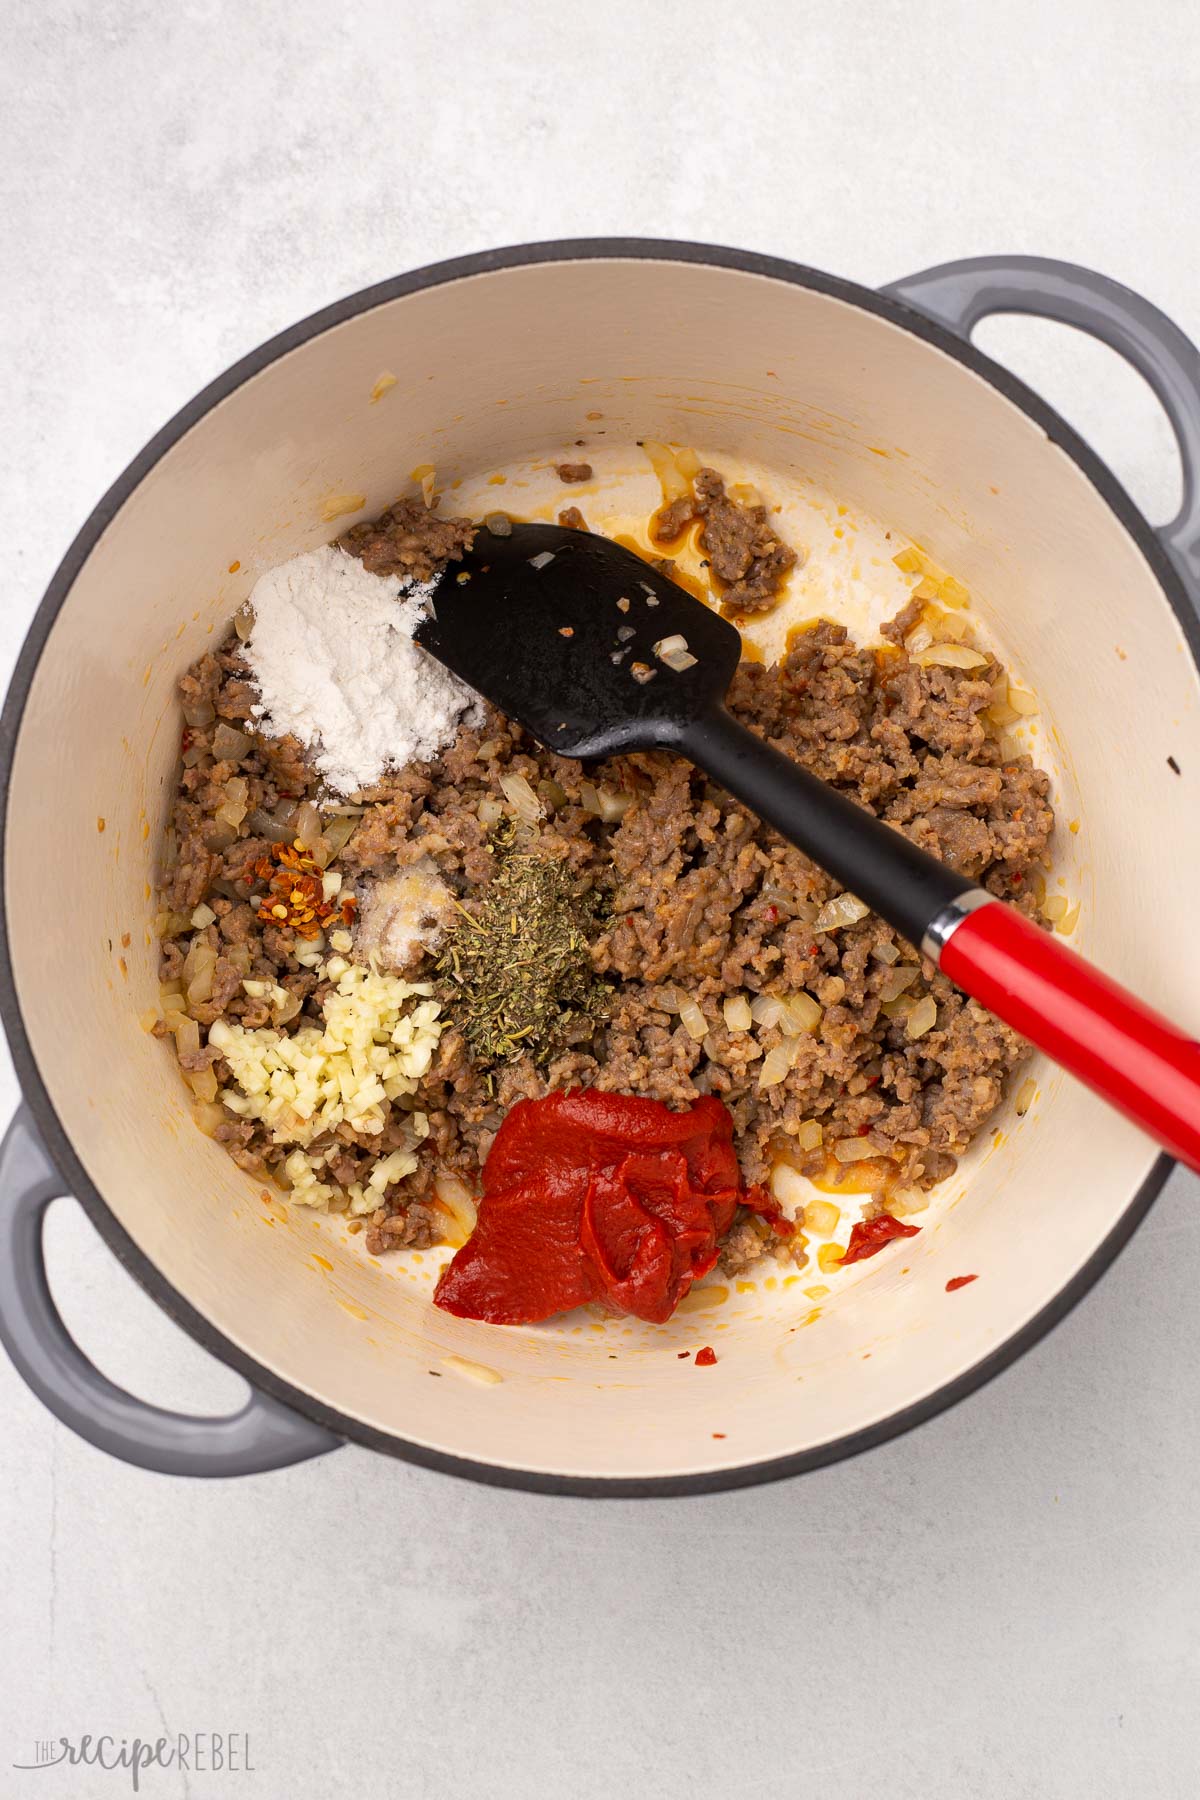 cooked sausage and other ingredients in a dutch oven with red and black spatula.